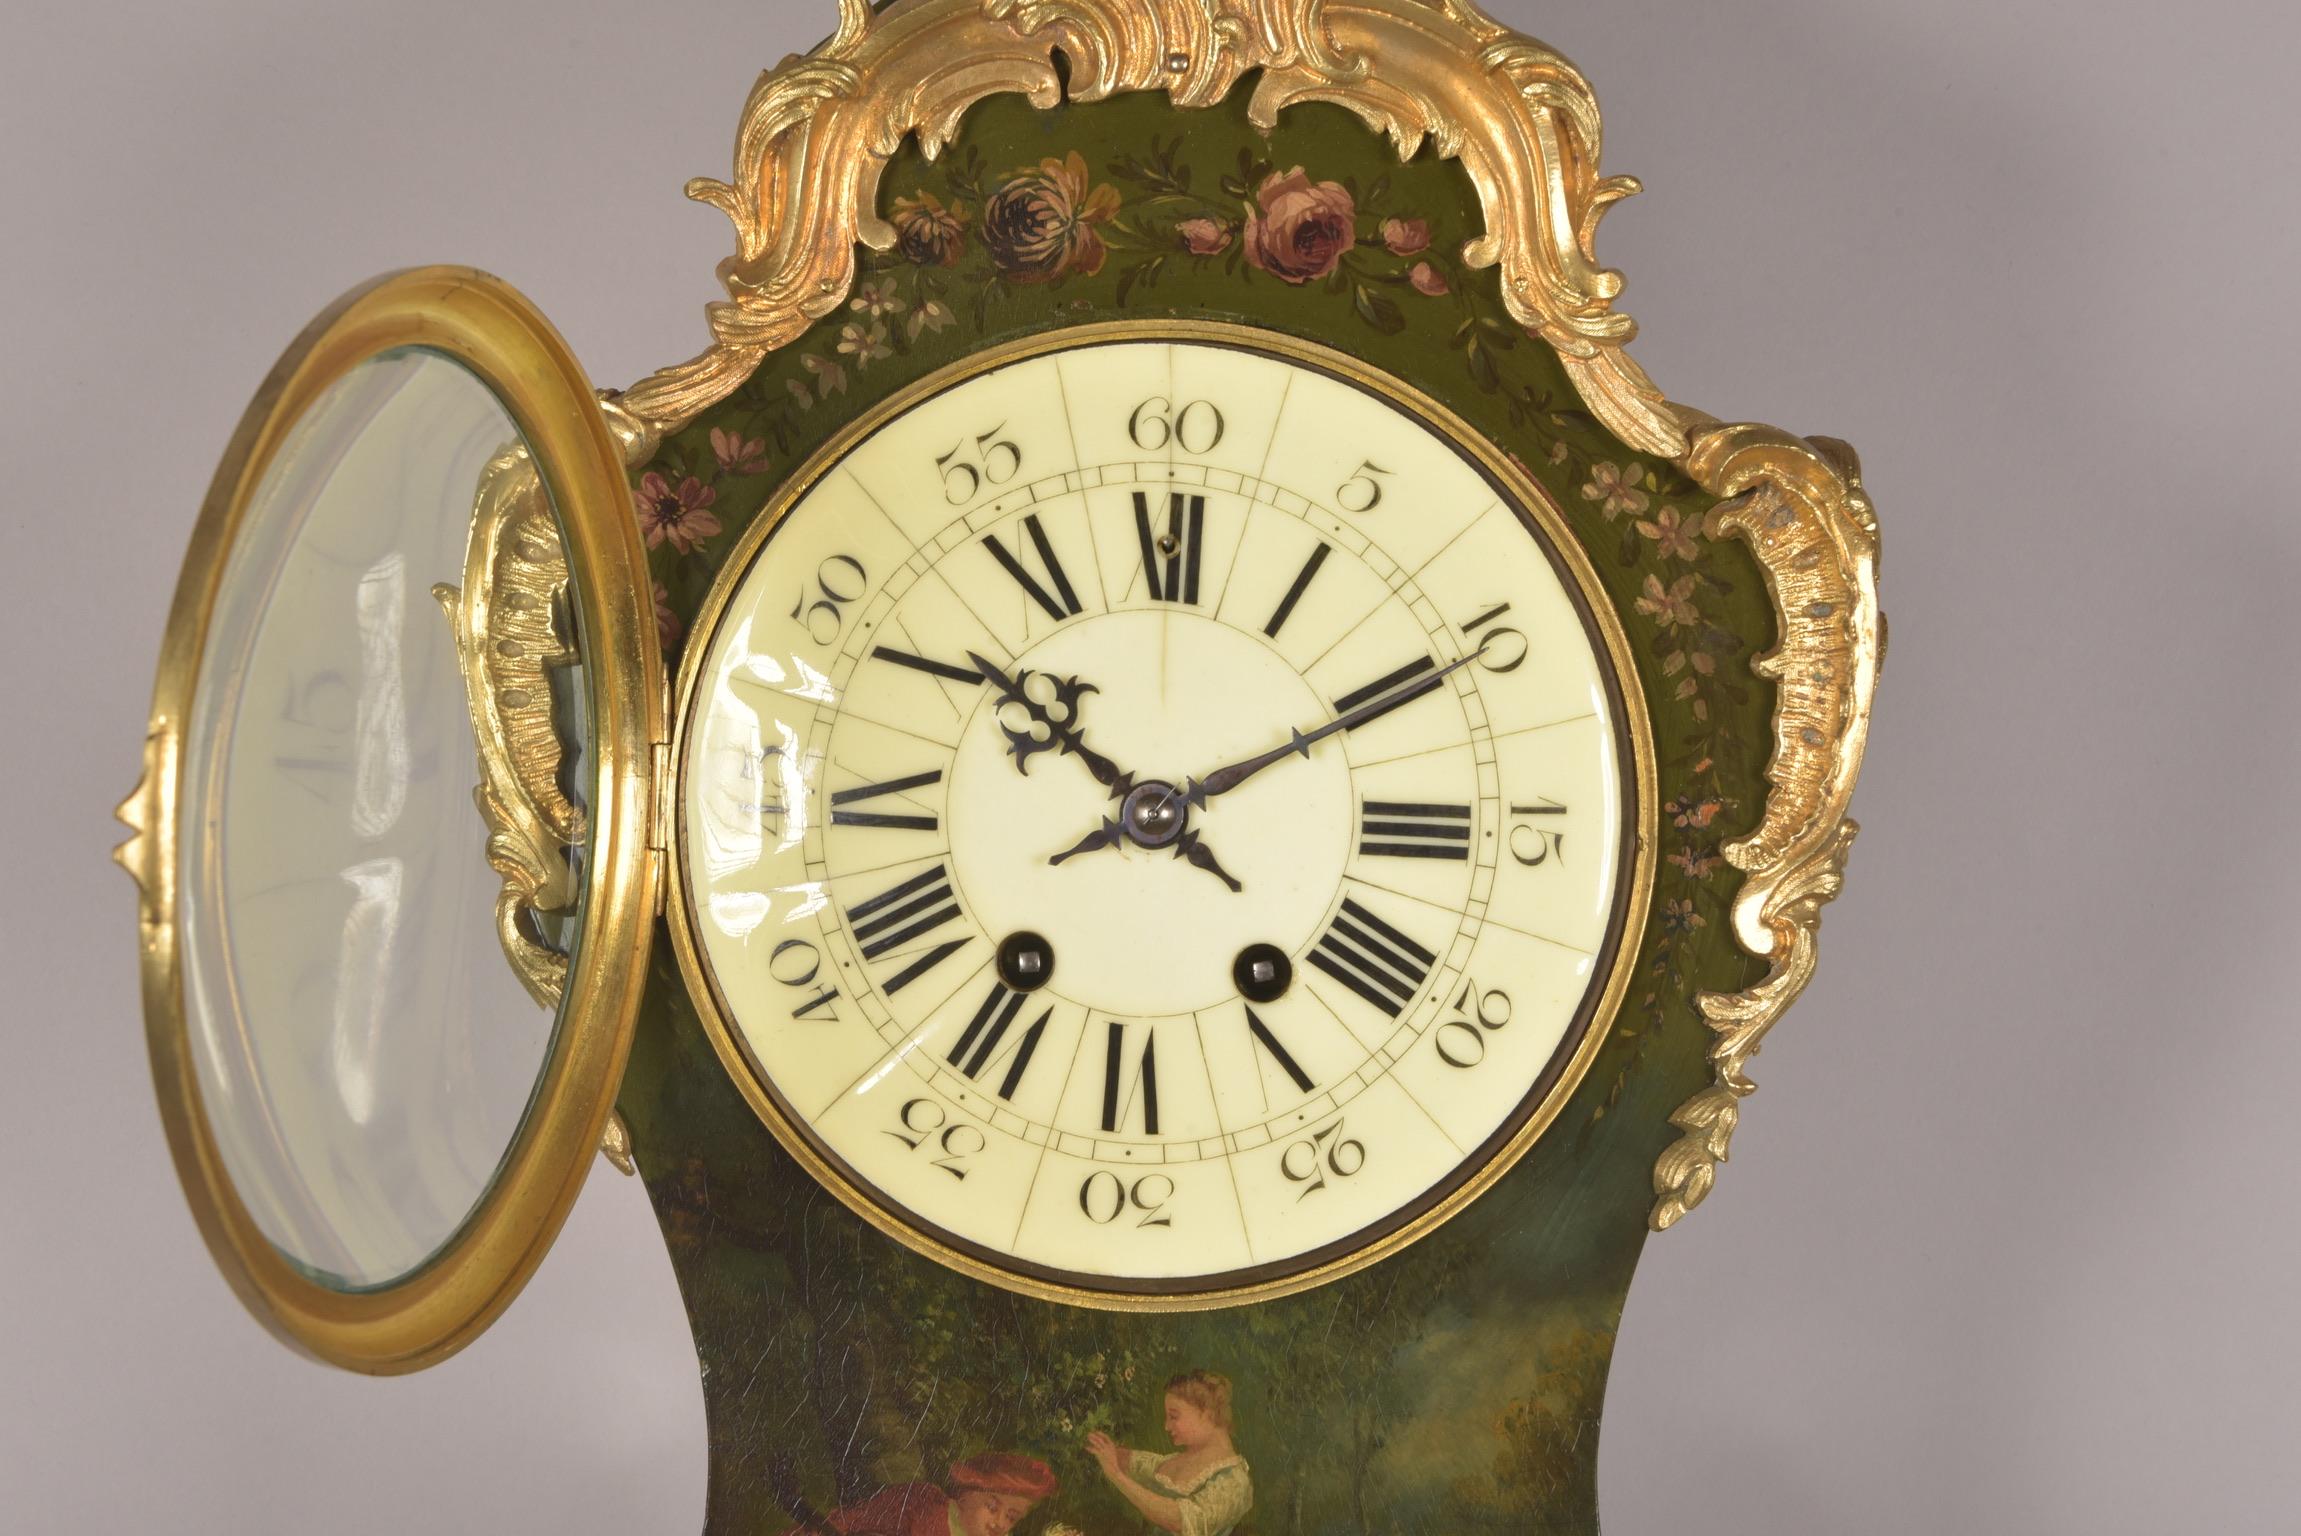 This is a French Cartel clock with console in Vernis Martin. Wood is romantically painted with festive image and flowers. Movement is stamped Vincenti ('medaille d' argent 1855').

This clock comes with key and pendulum.

This clock comes with a